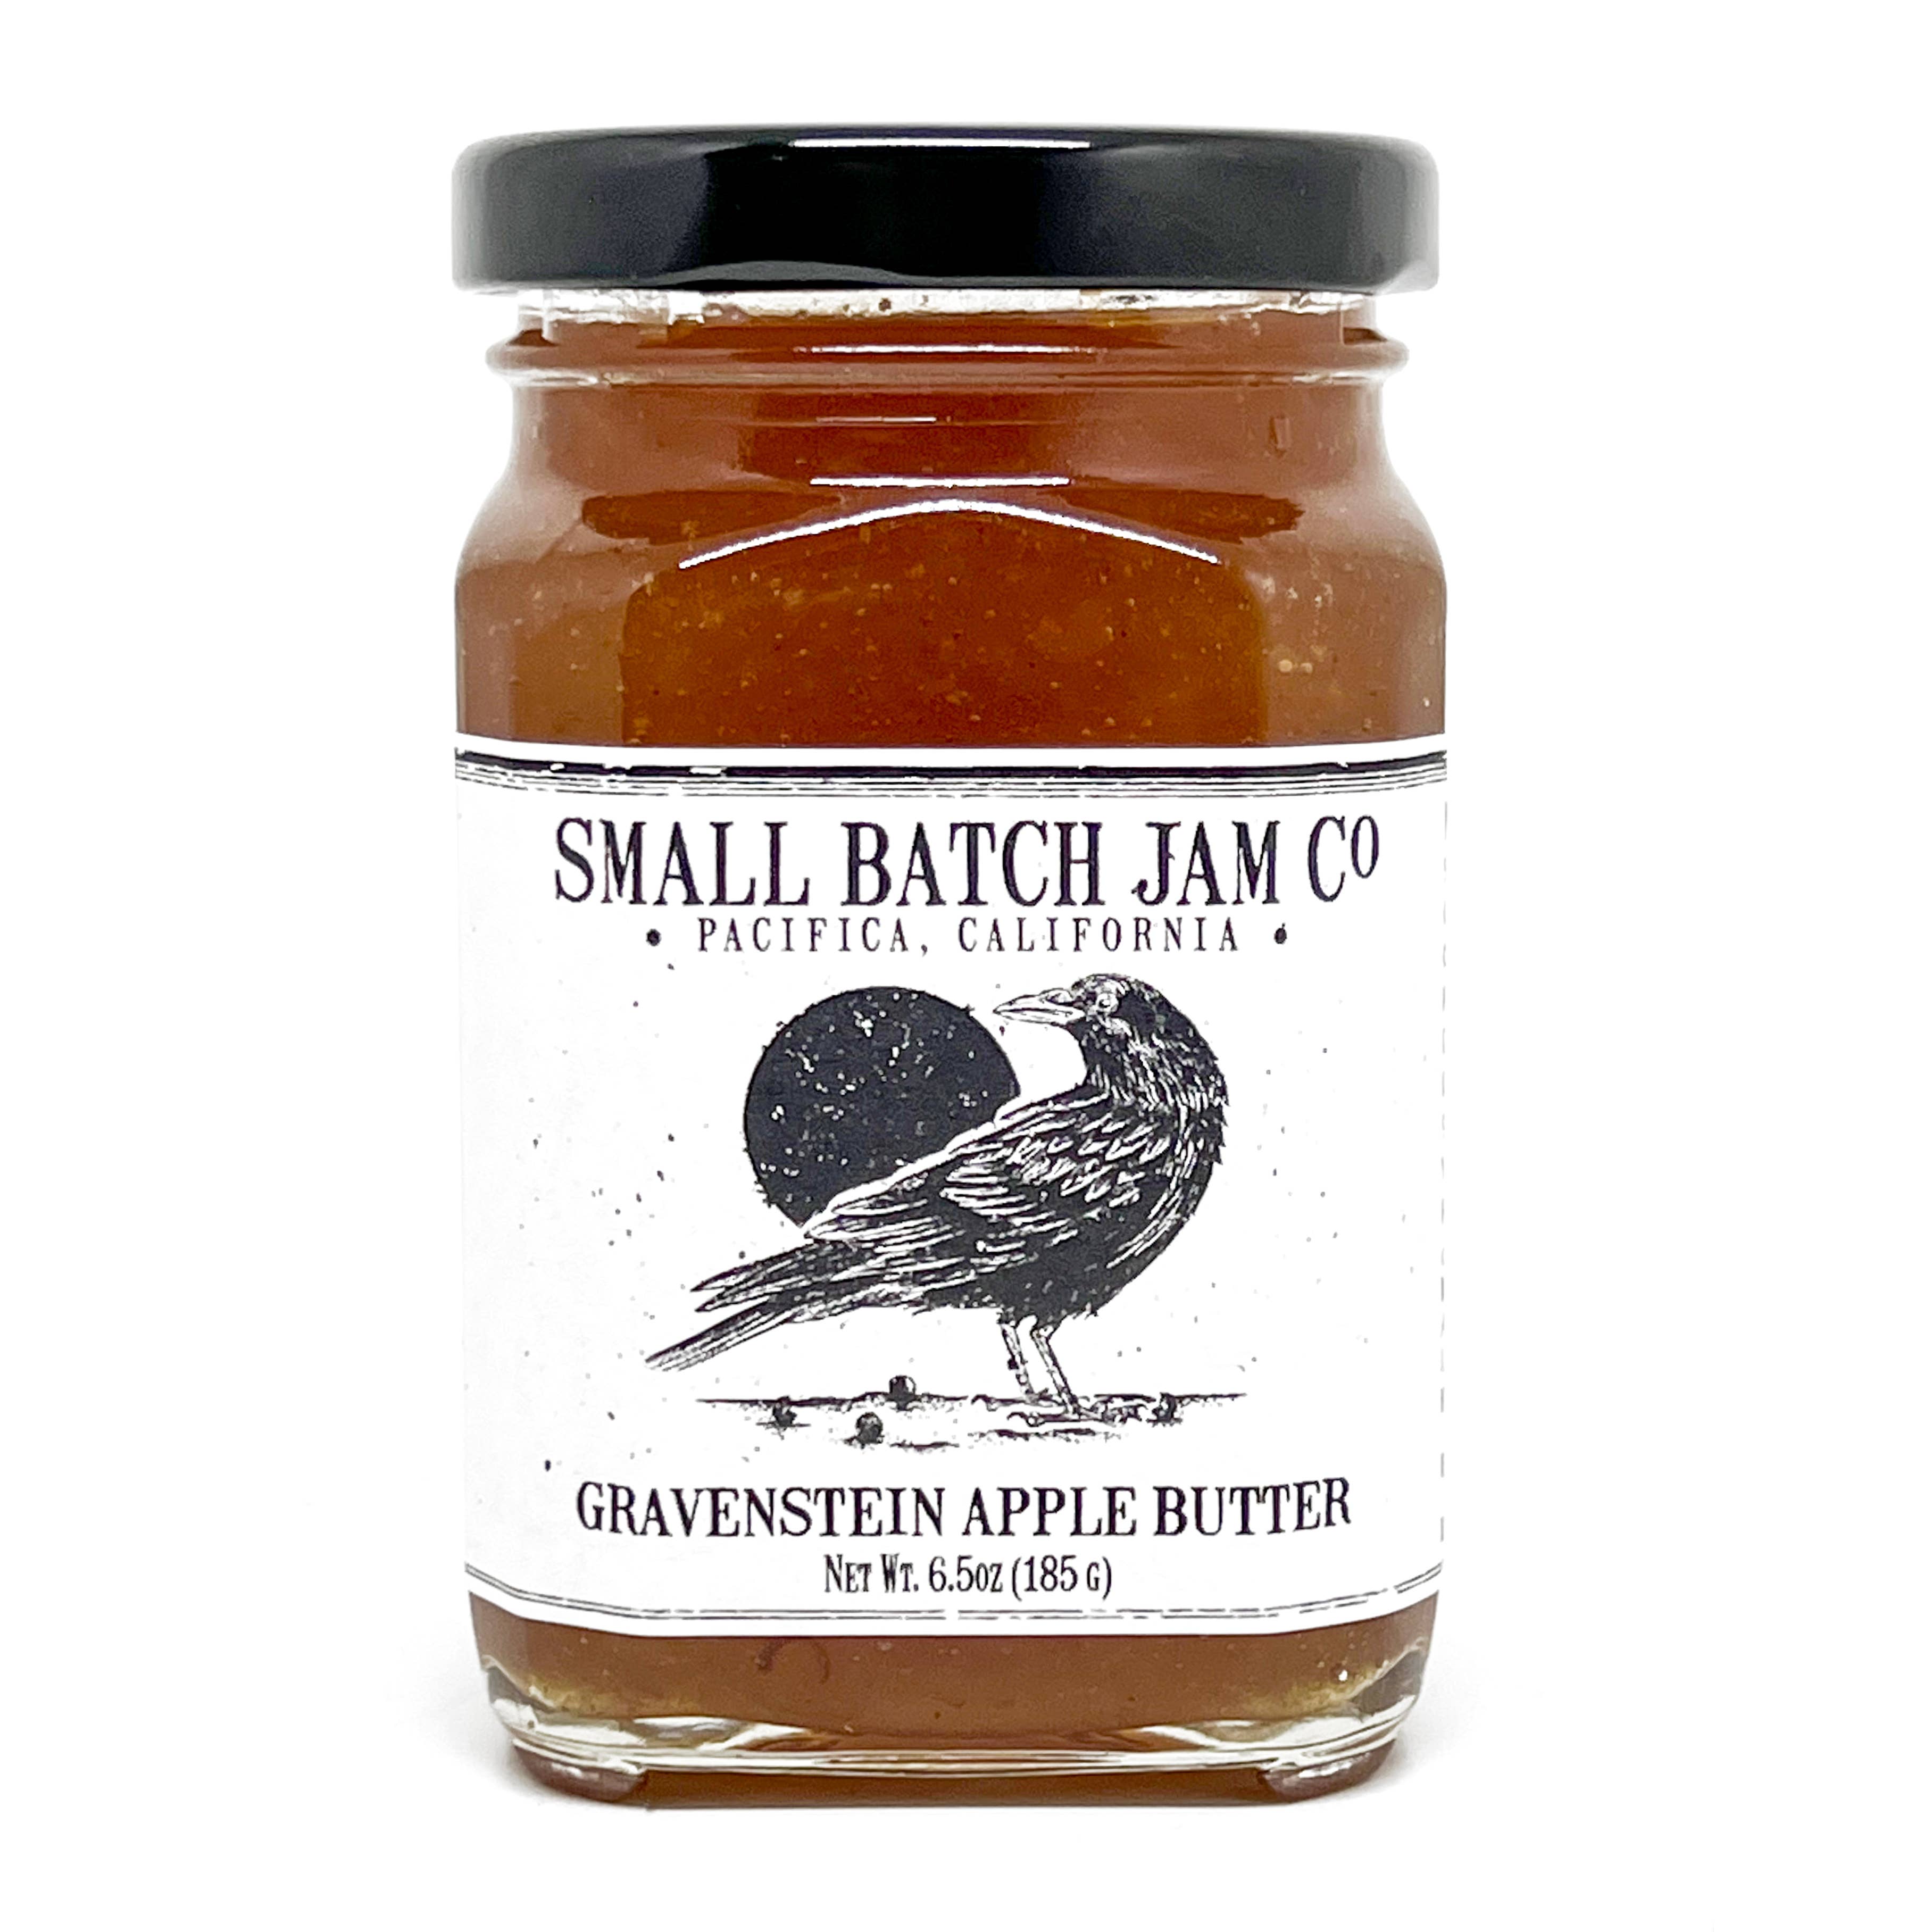 Small Batch Jam Co. wholesale products